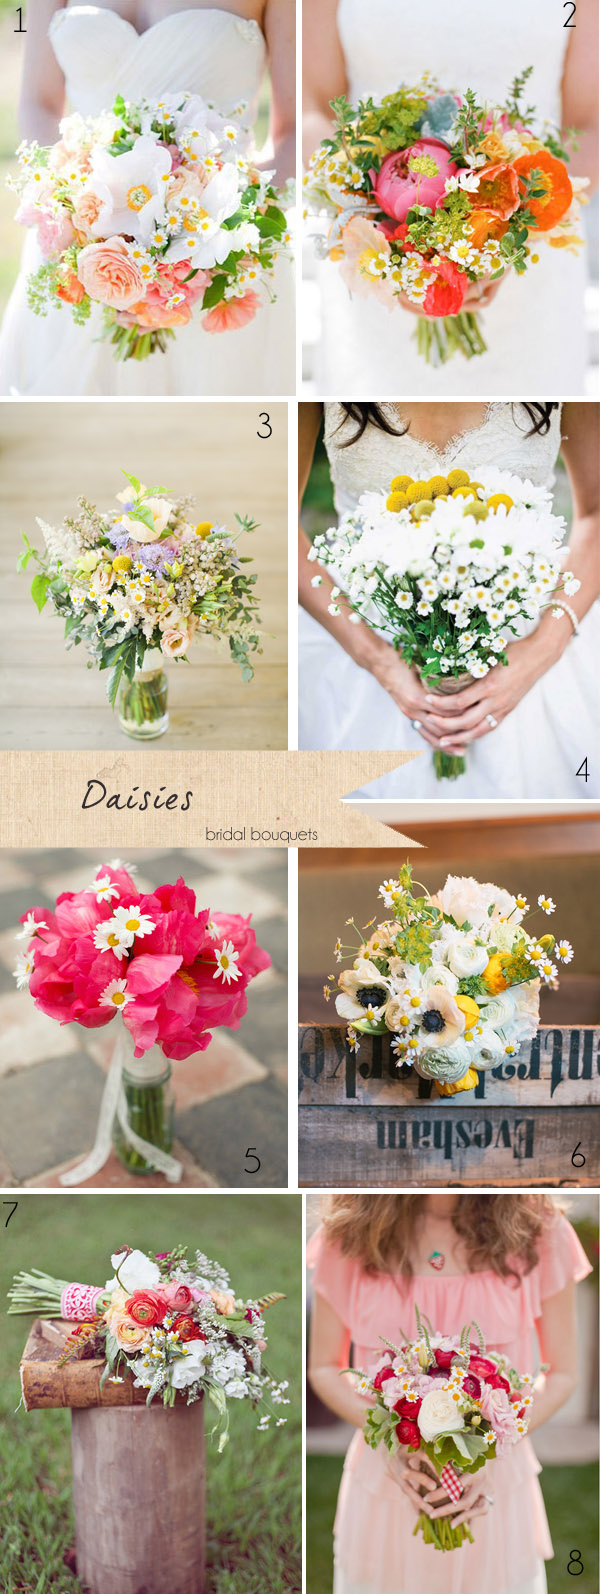 daisy wedding flowers bouquets daisies